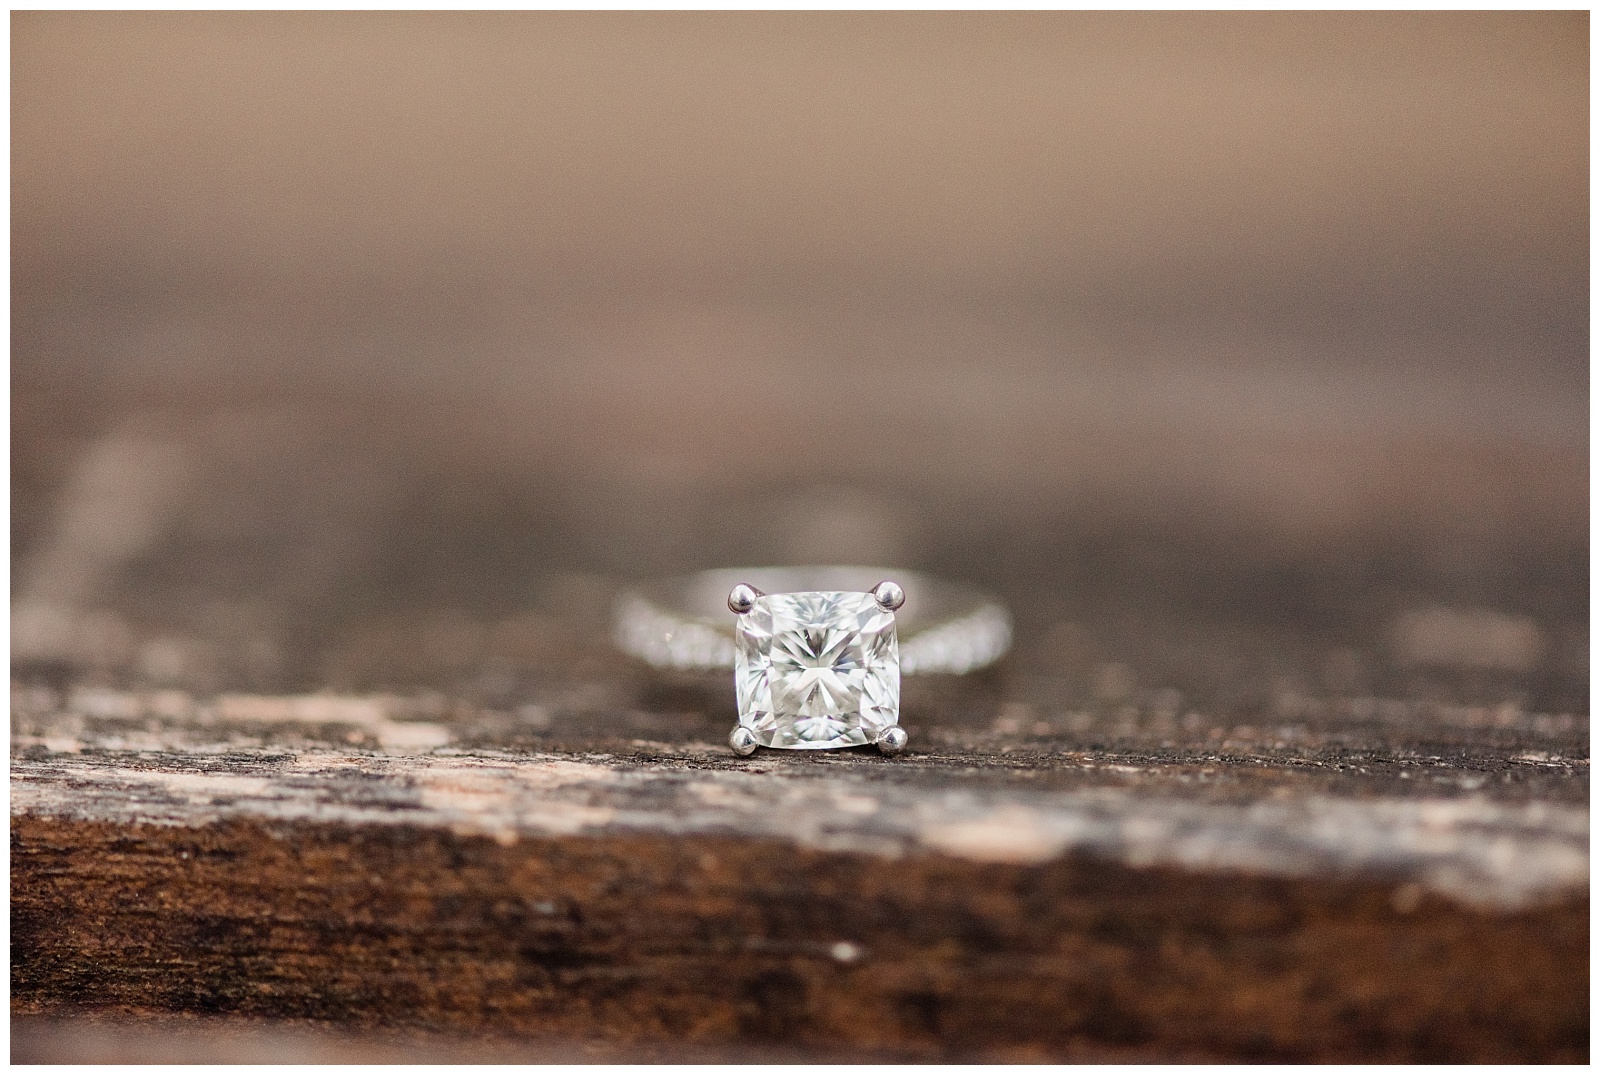 A diamond engagement ring sits on a wooden bench in NY.